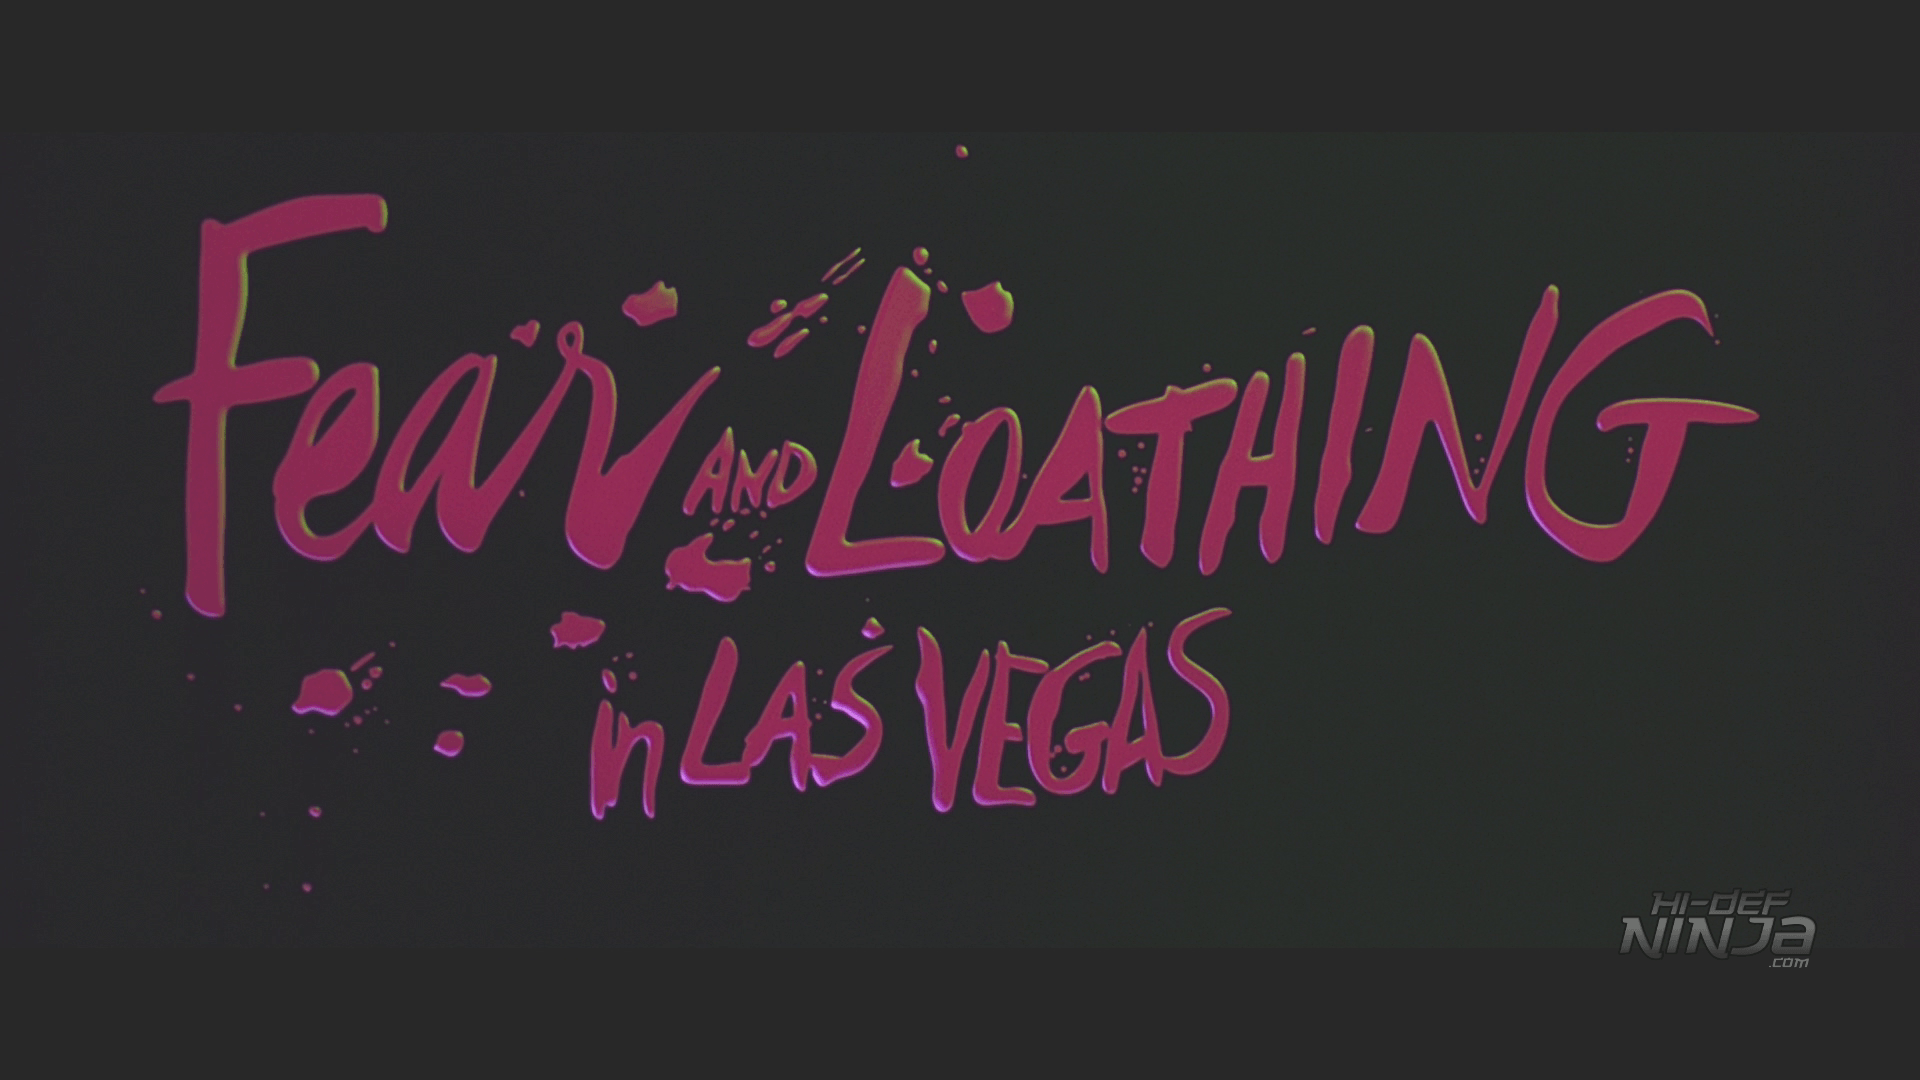 Iconic Art' Steelbook Review, FEAR AND LOATHING IN LAS VEGAS